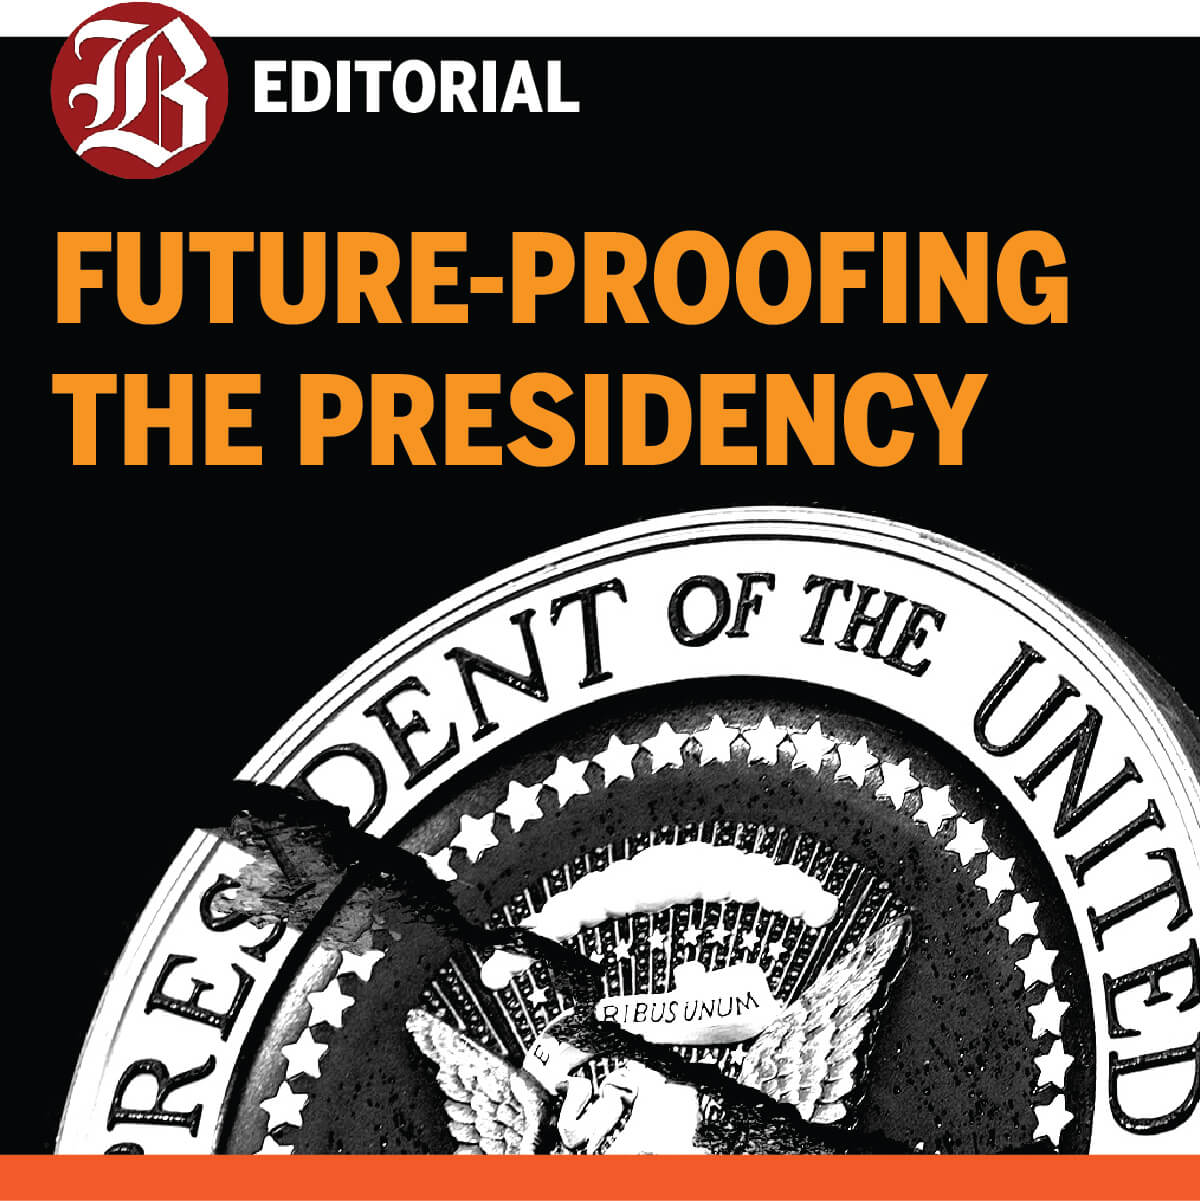 Future-proofing the presidency